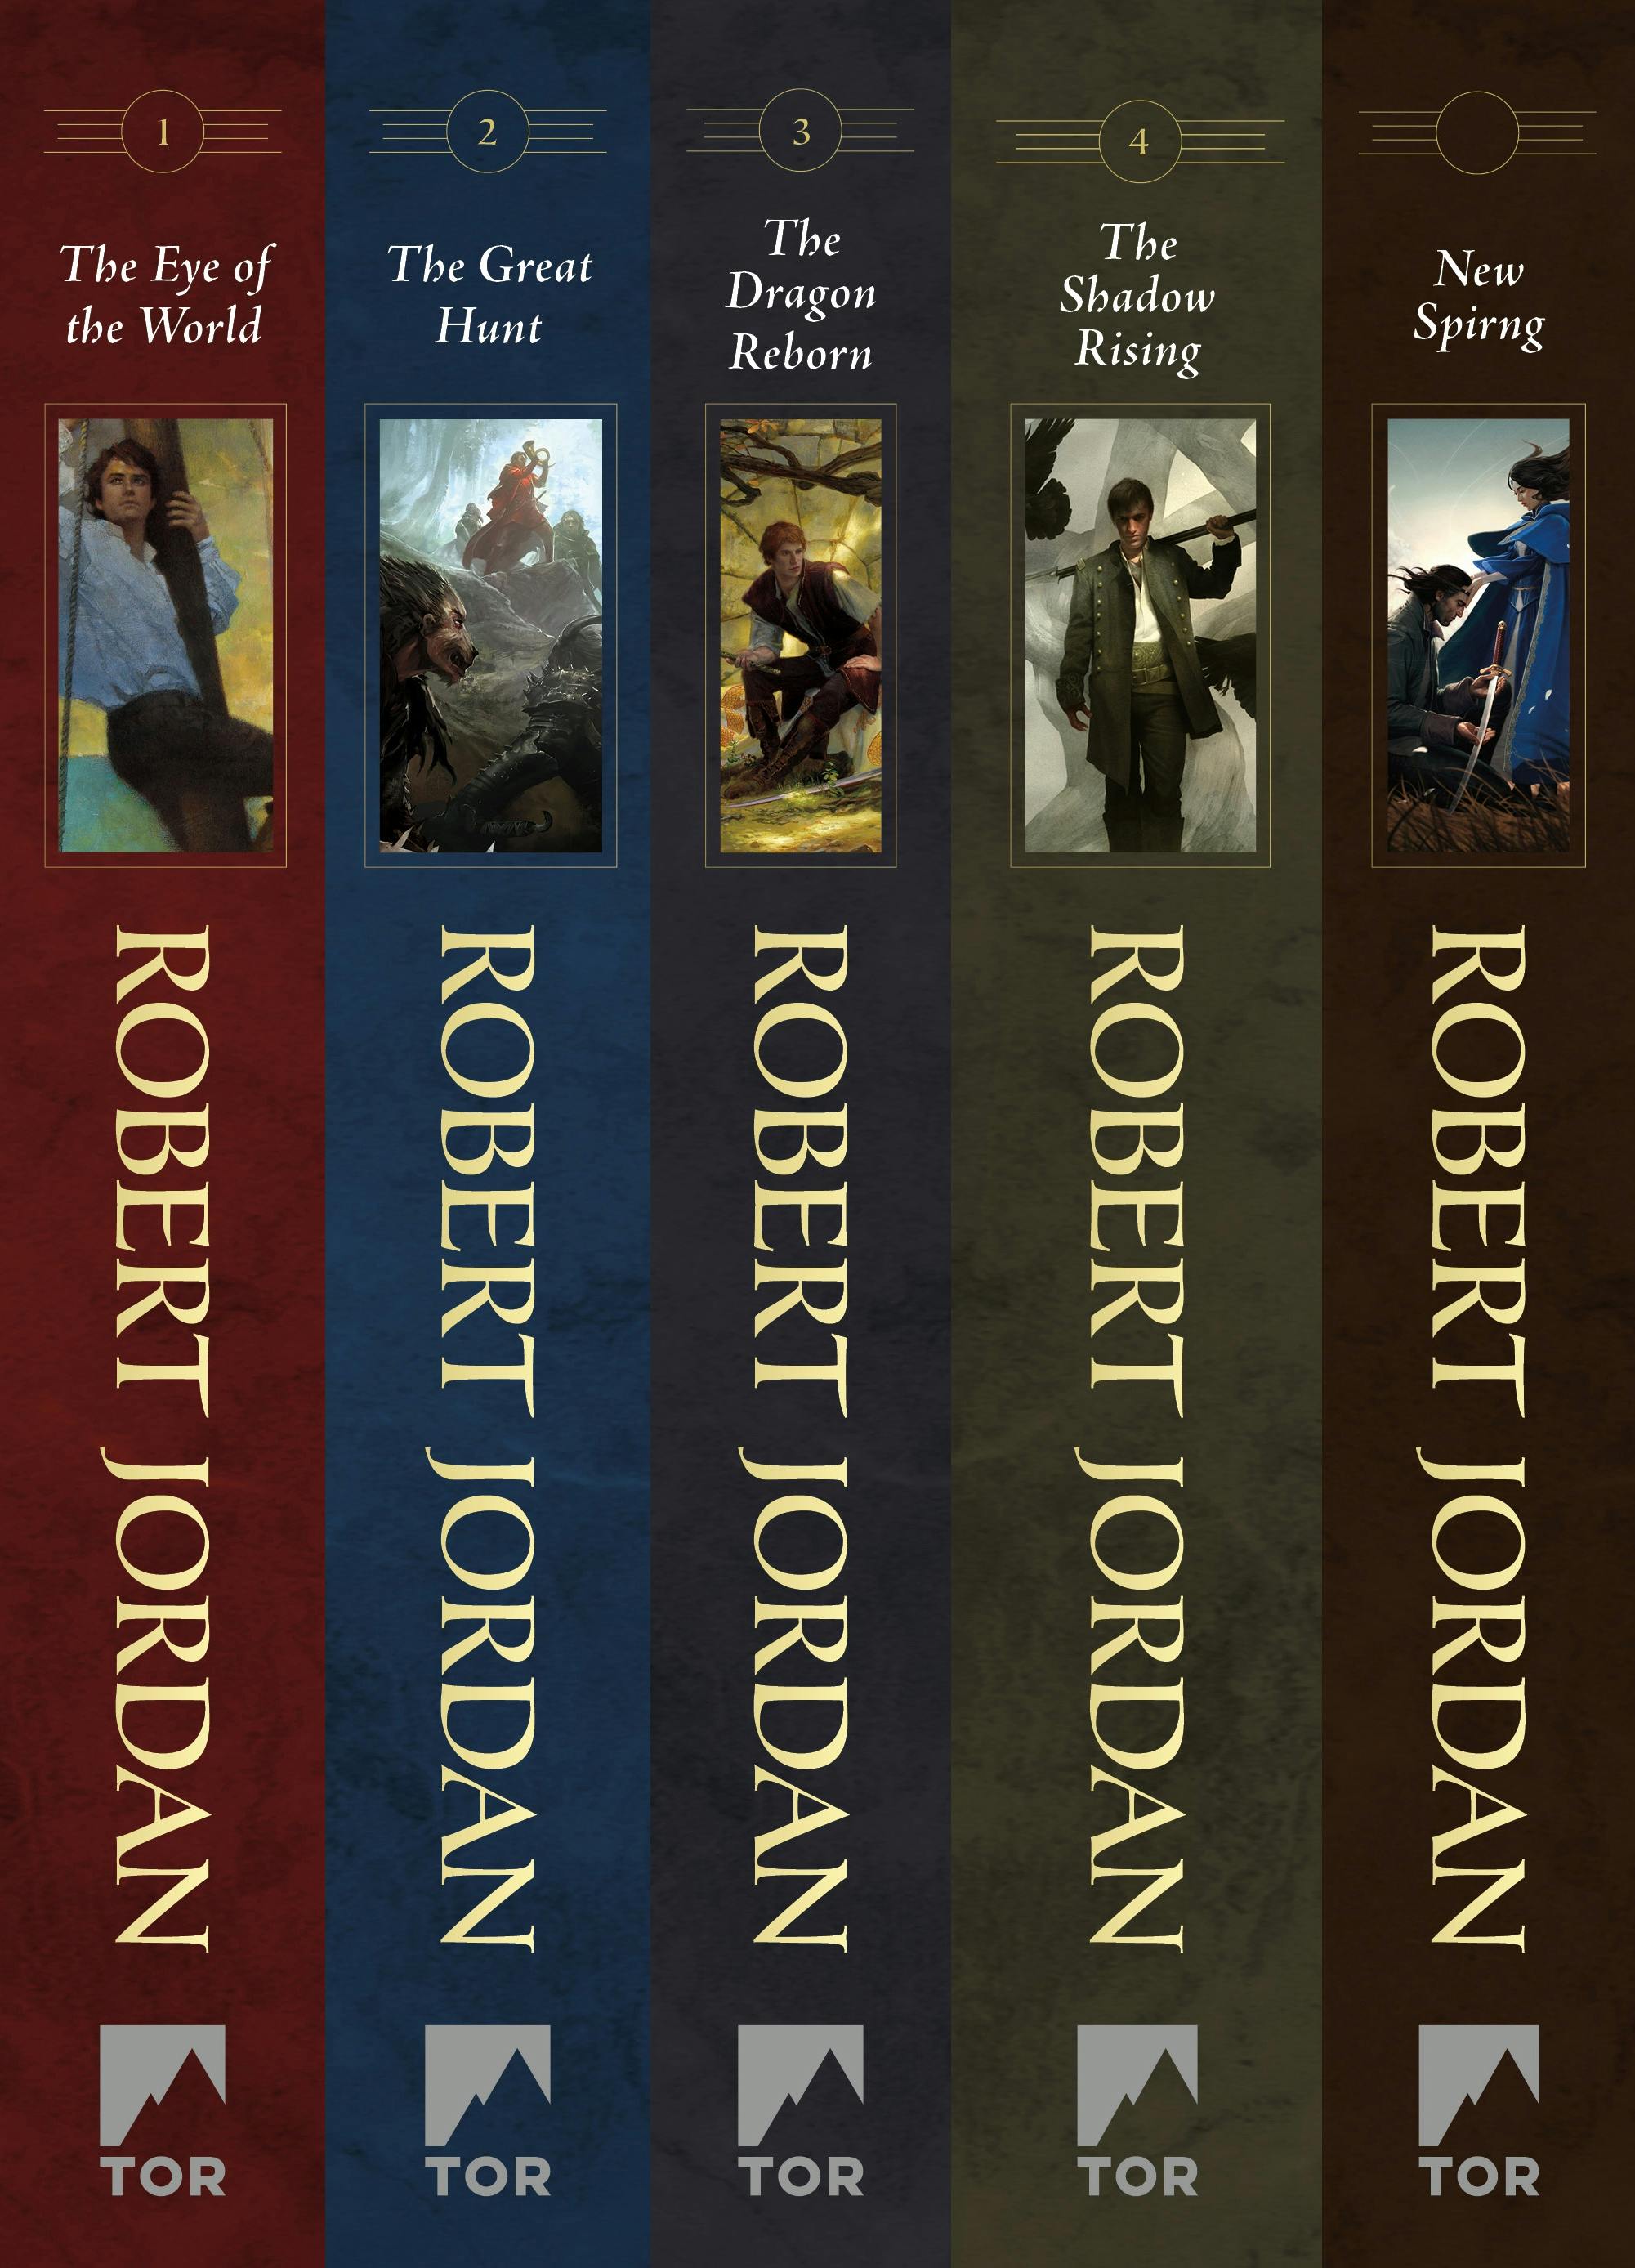 Cover for the book titled as: The Wheel of Time, Books 1-4